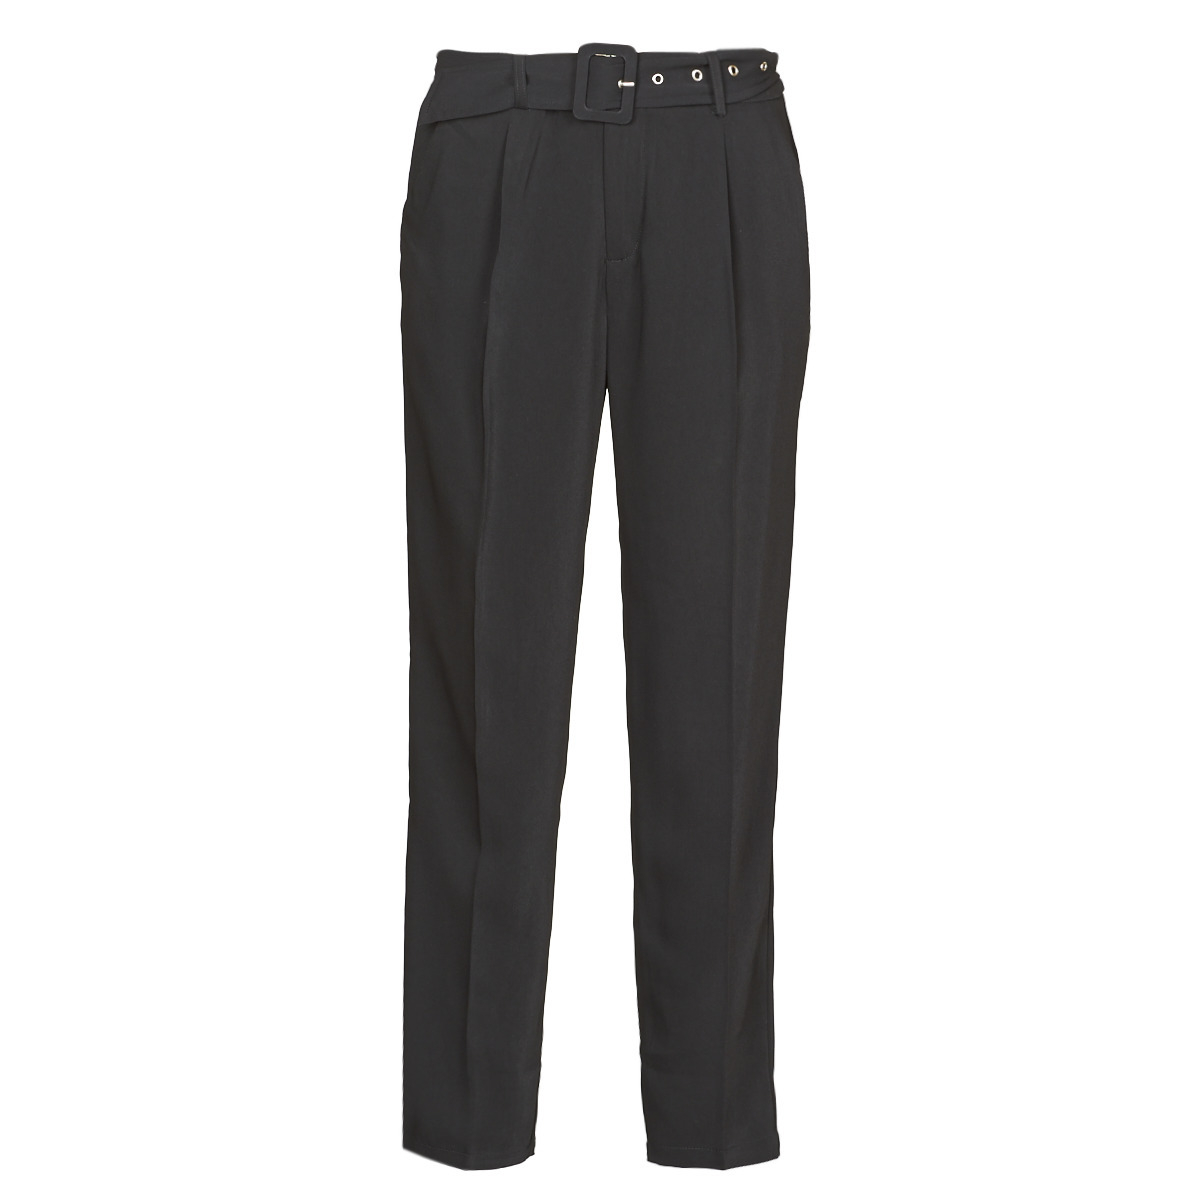 Betty London - Black Trousers for Women at Spartoo GOOFASH